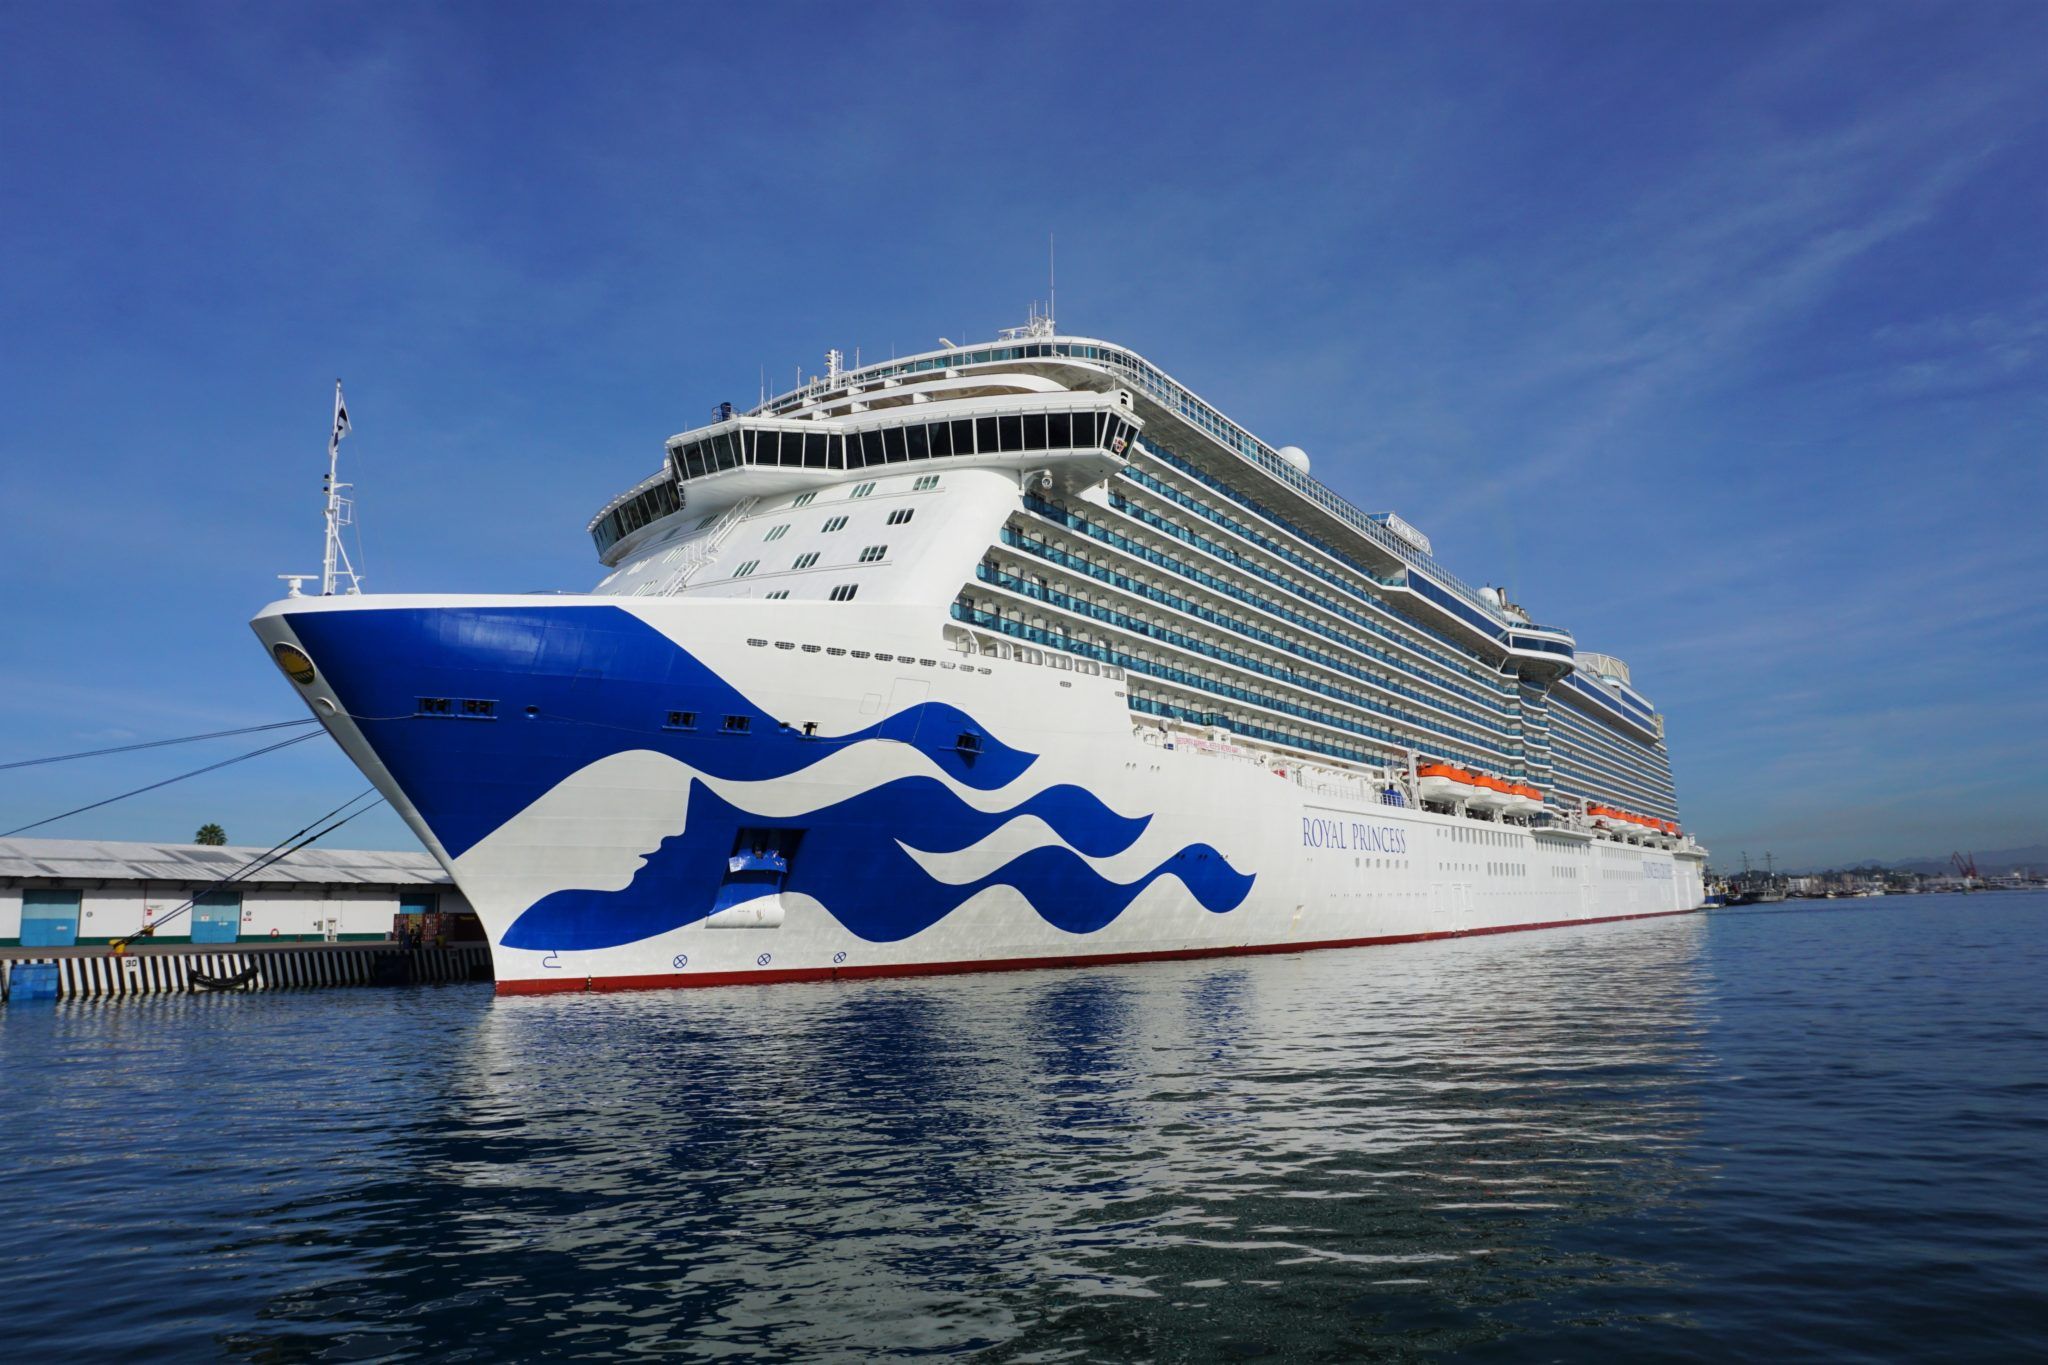 Health Protocols that Princess Cruises will implement